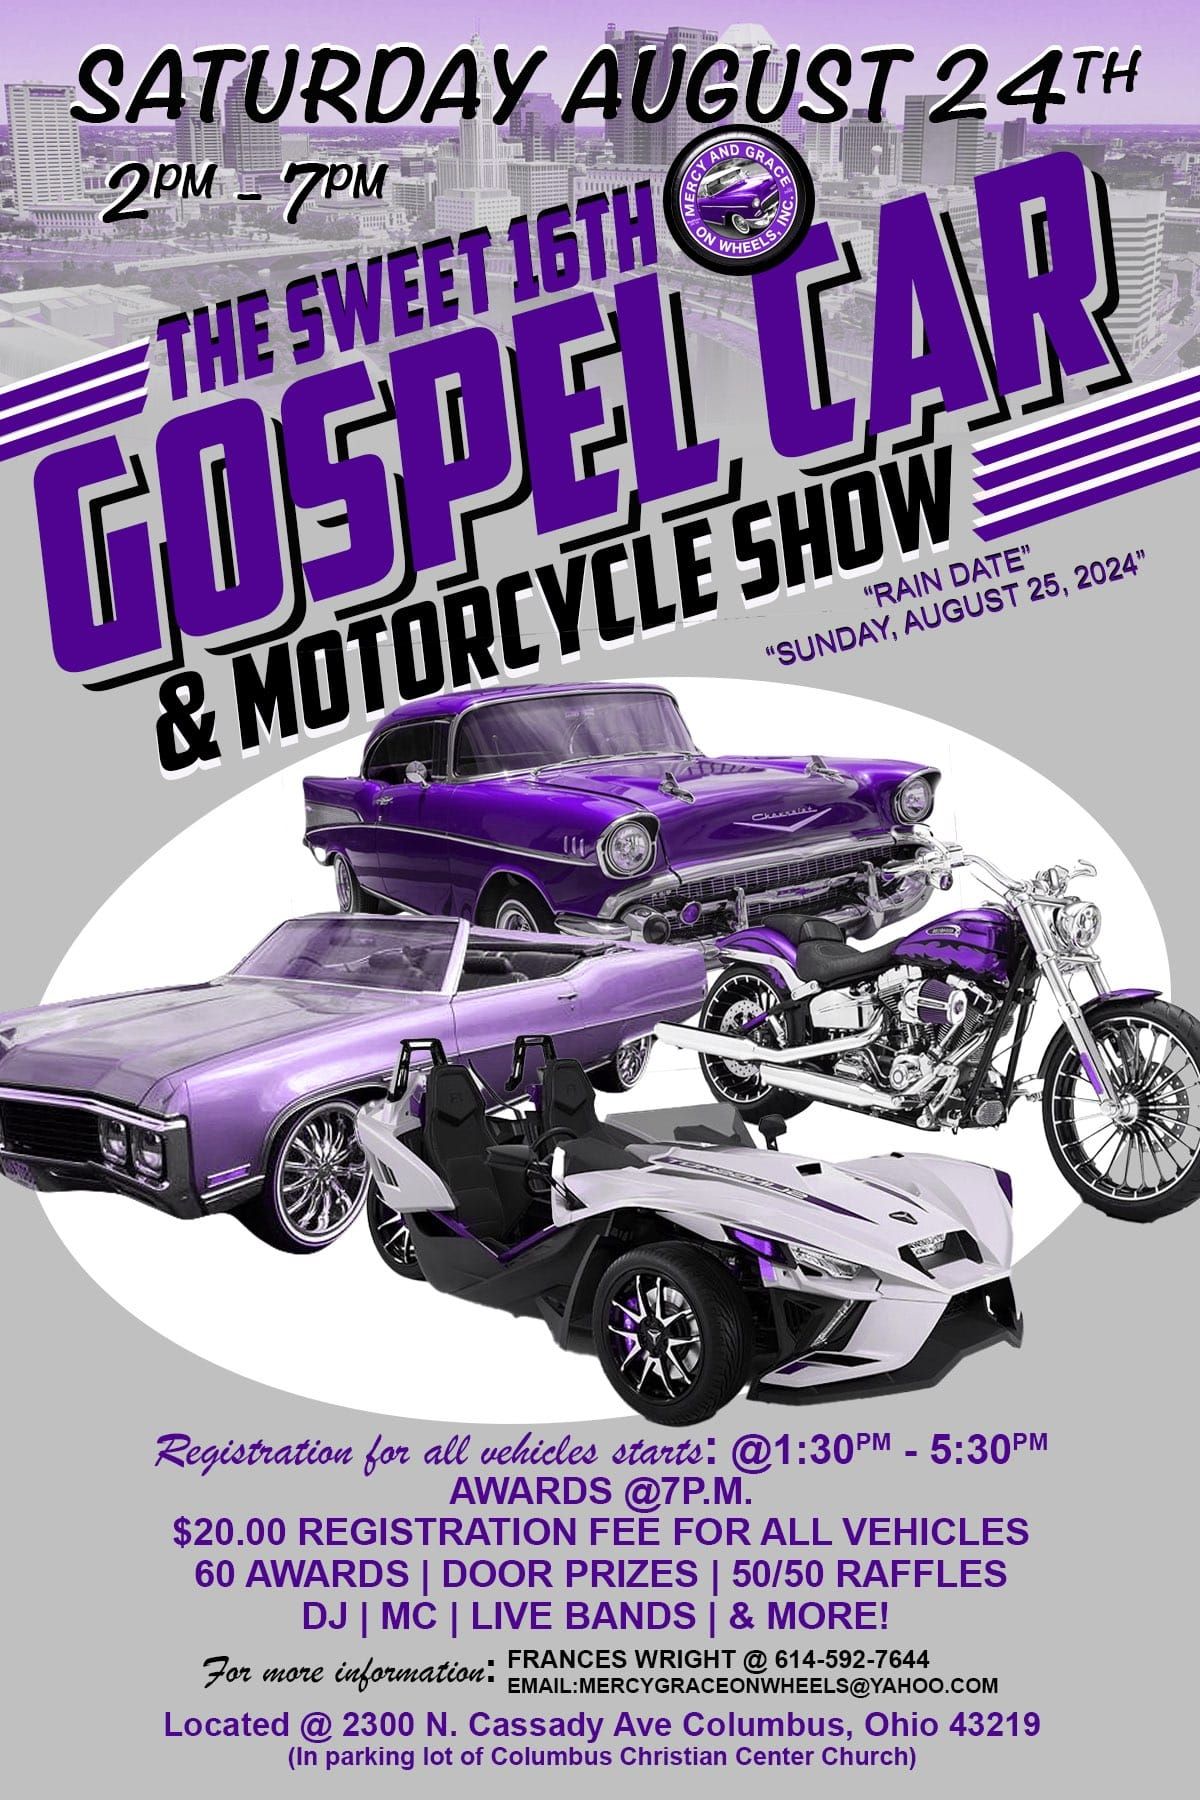 The Sweet 16th Gospel Car & Motorcycle Show 